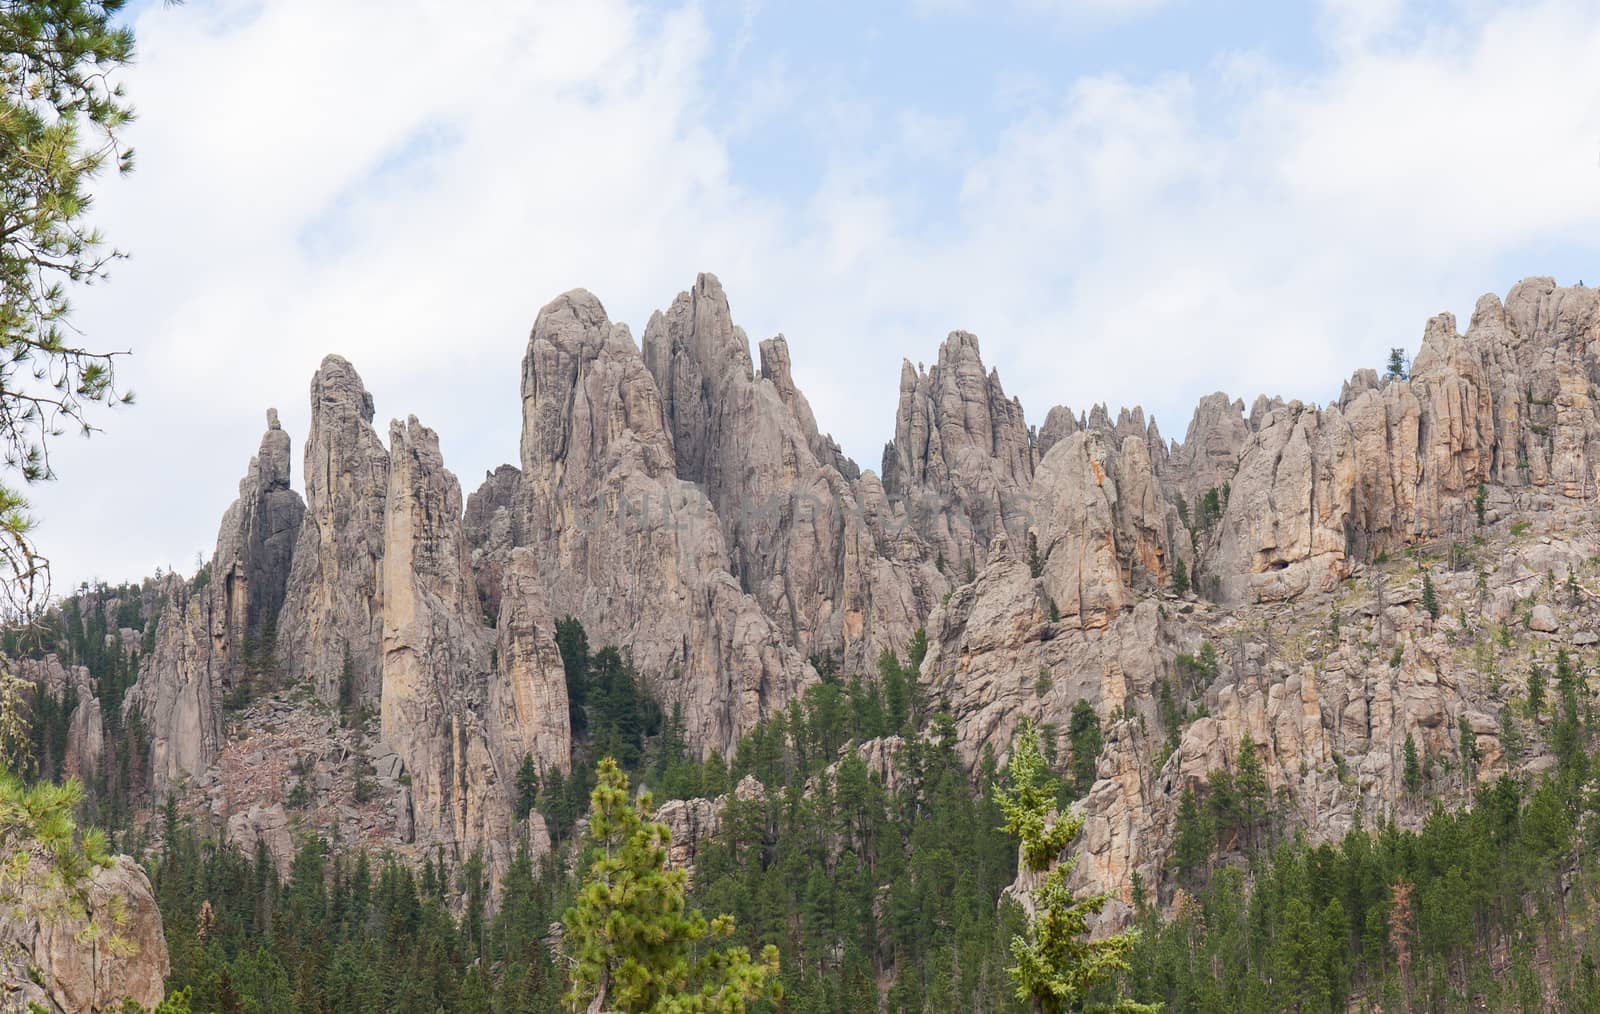 Custer State Park is next to Mount Rushmore and shares the same rugged Black Hills landscape.